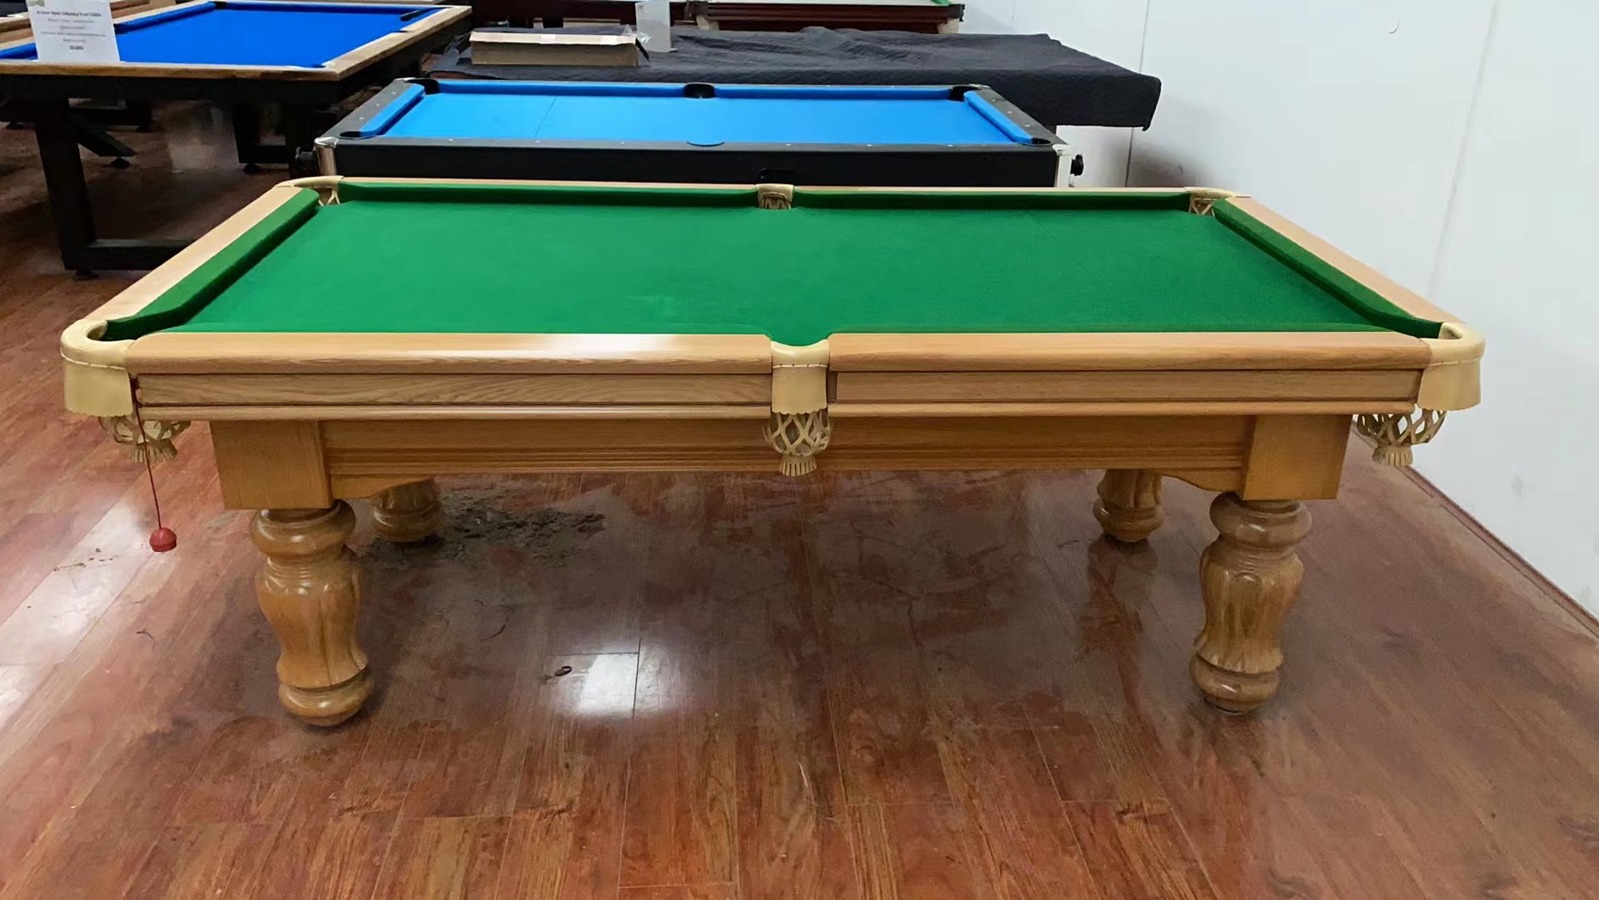 Melbourne Special - 7 Foot Used Pool Table in excellent condition